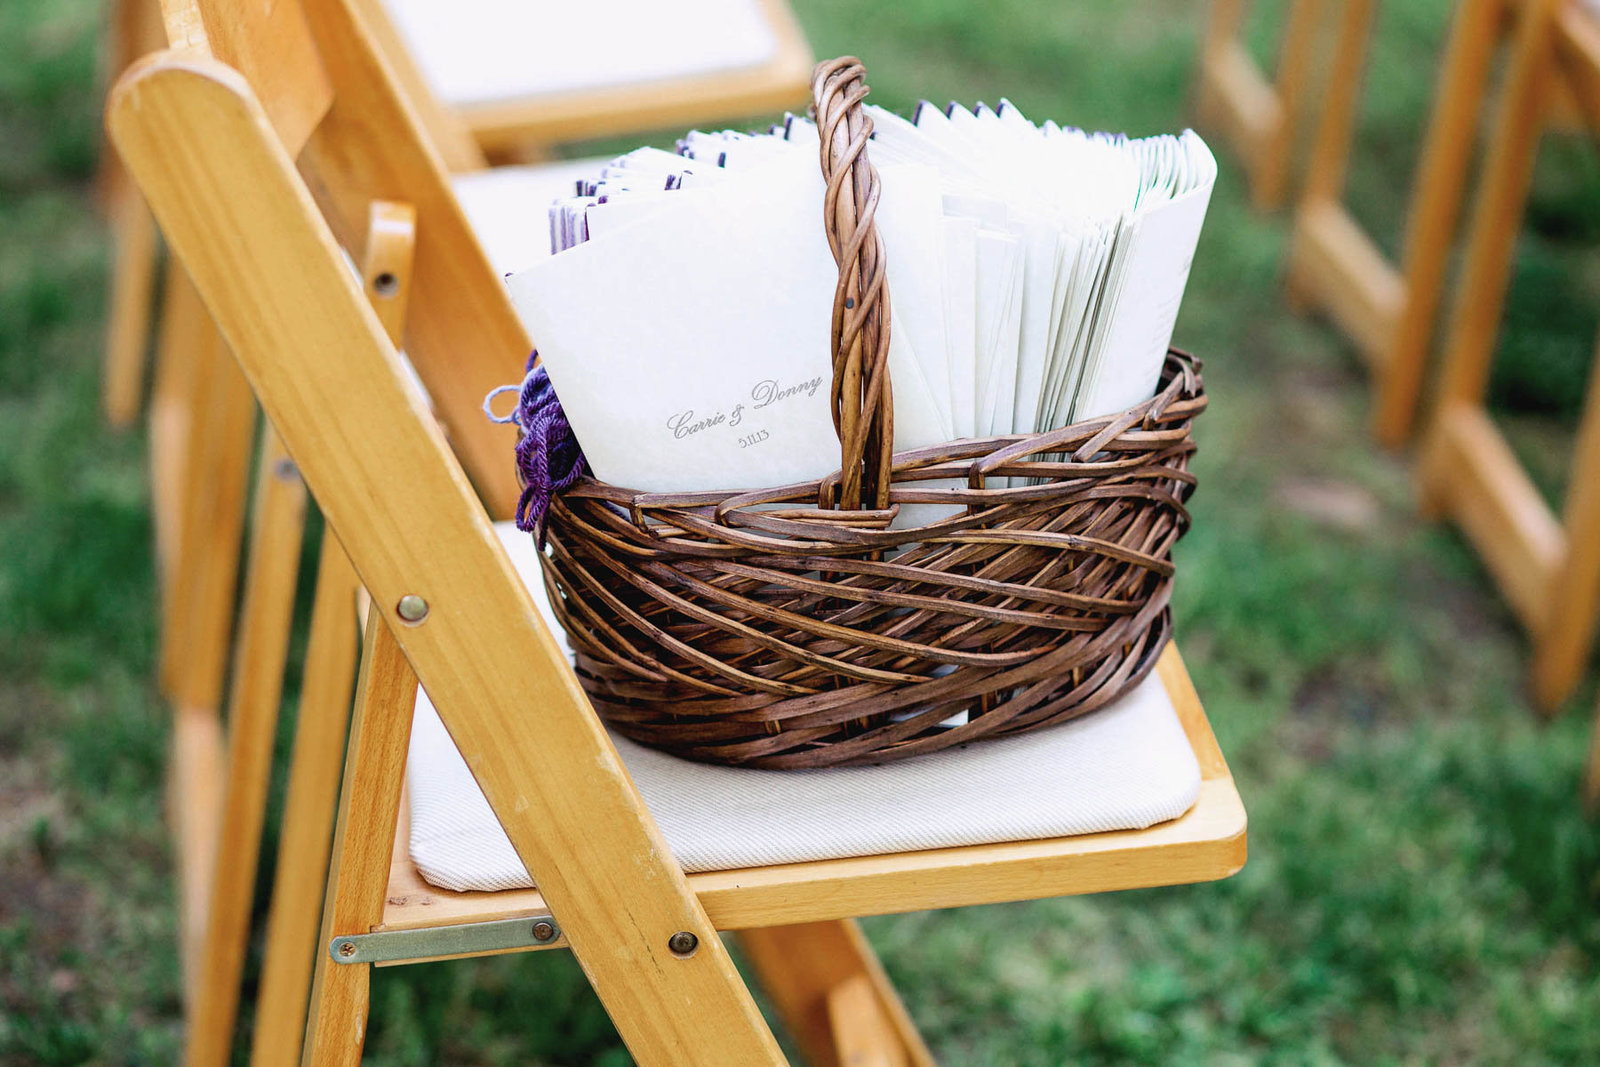 Programs are stacked in a basket, Lewes Historical Society, Delaware. Kate Timbers Photography.